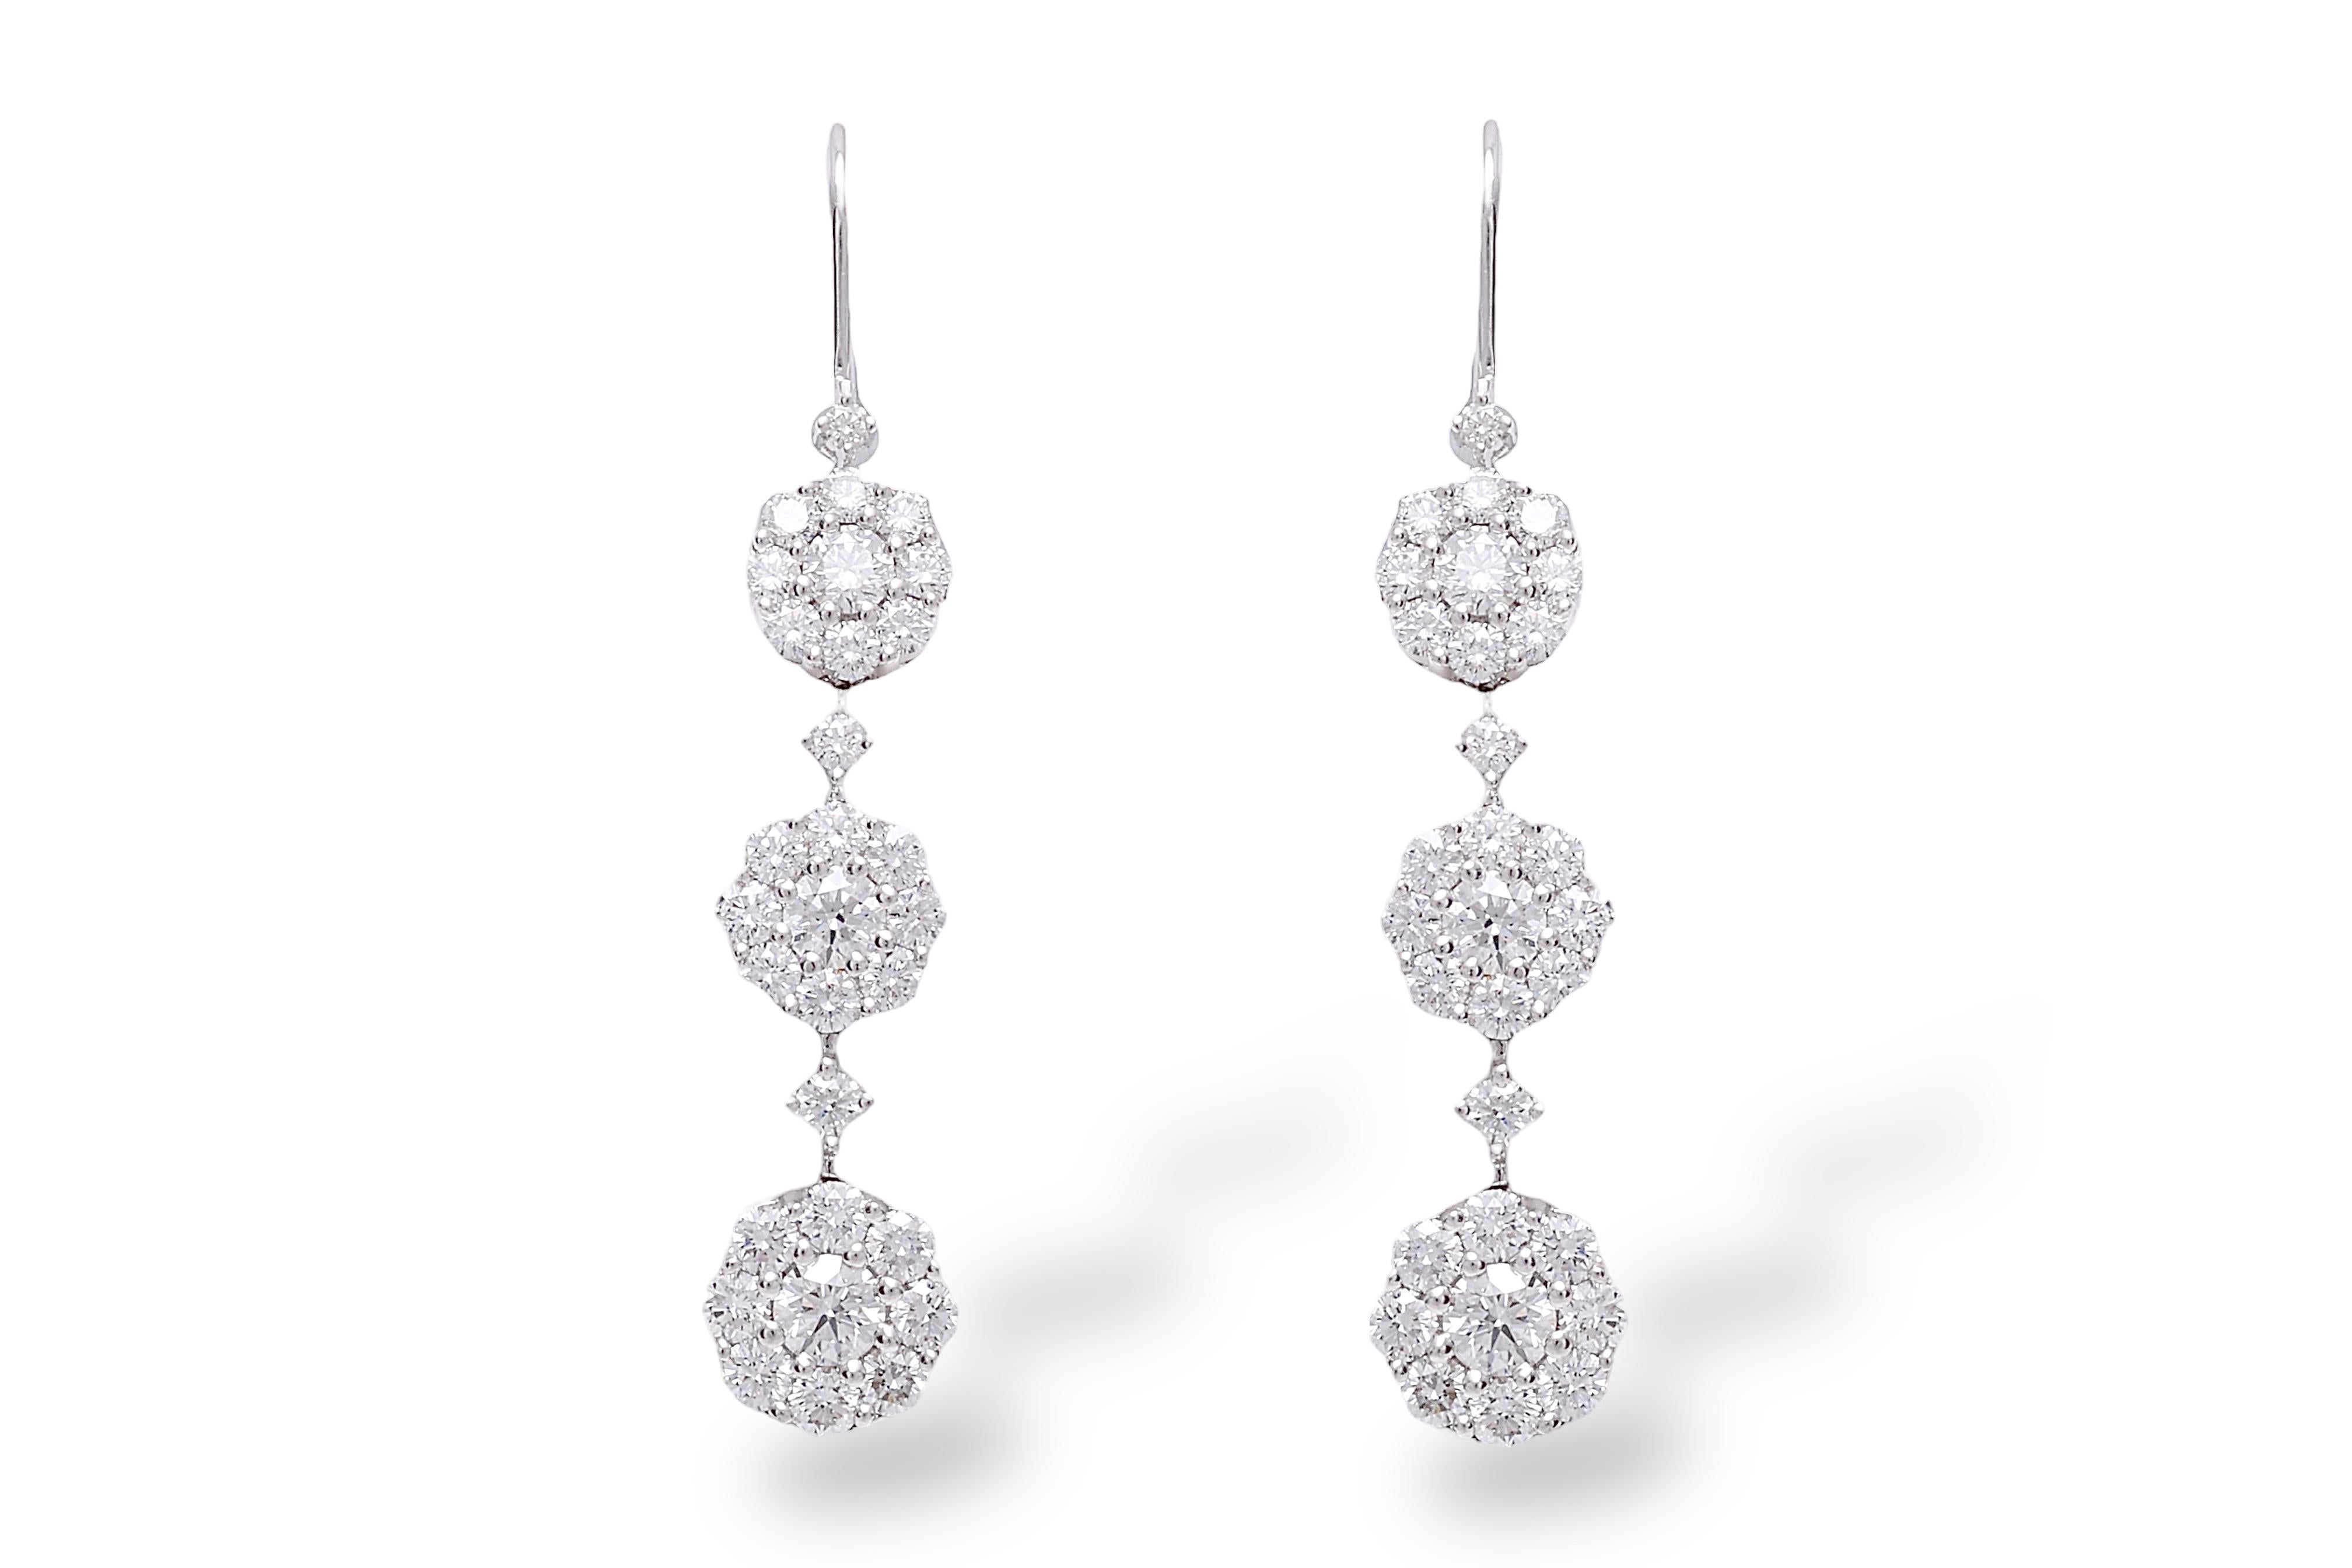 Stunning 18 kt. White Gold Flower Earrings With 2.66 ct. Diamonds

Diamonds: Brilliant cut diamonds together 2.66 ct.

Material: 18 kt. white gold

Measurements: 45 mm x 8.1 mm

Total weight: 7 gram / 0.245 oz / 4.5 dwt